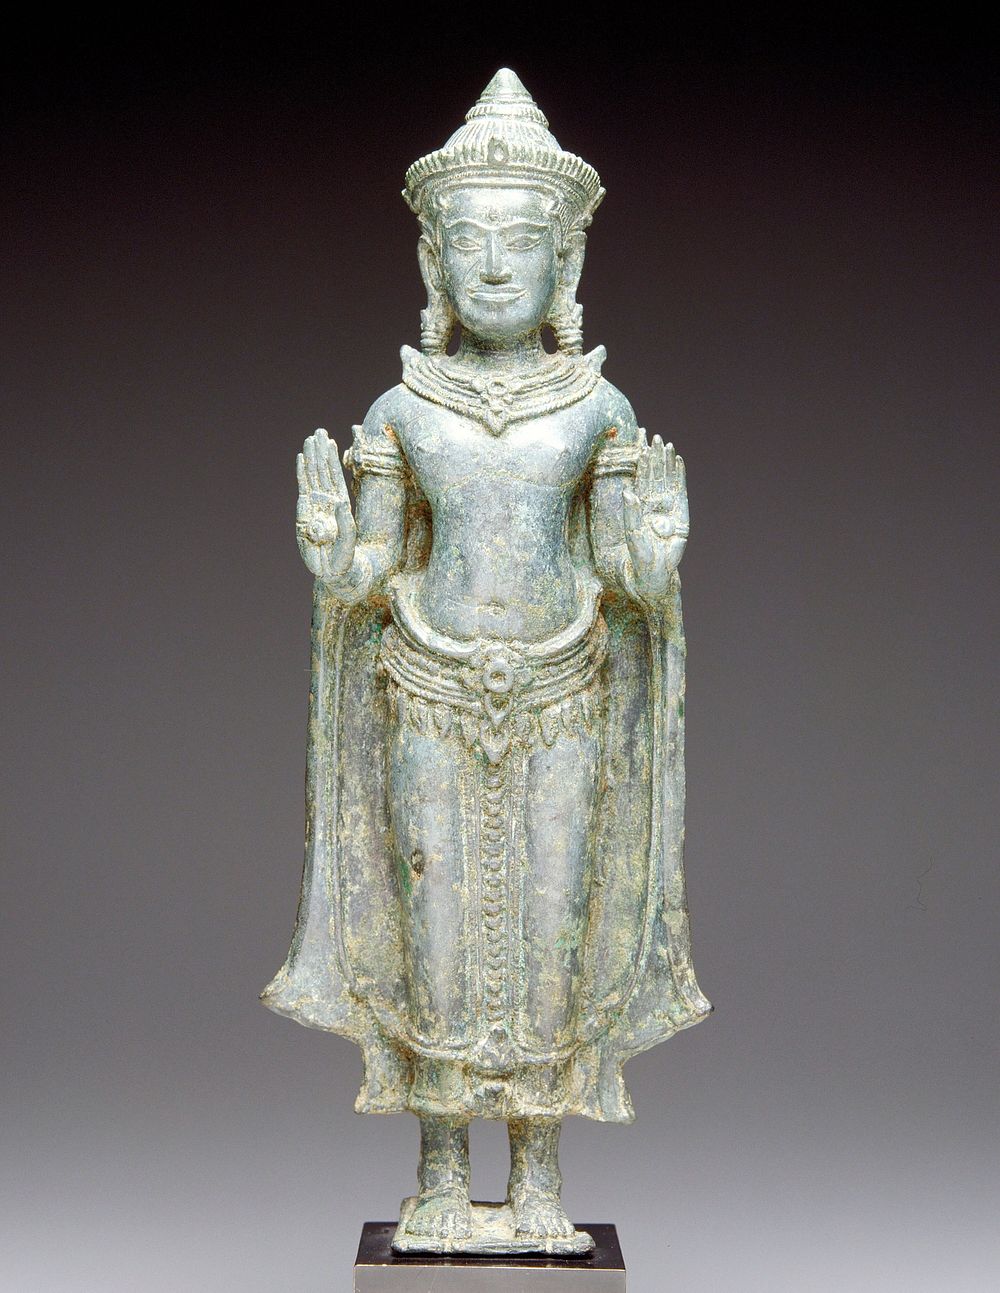 standing Buddha wearing cape; both hands raised in abaya mudra; wearing caplike crown, earrings and necklace; attached to…